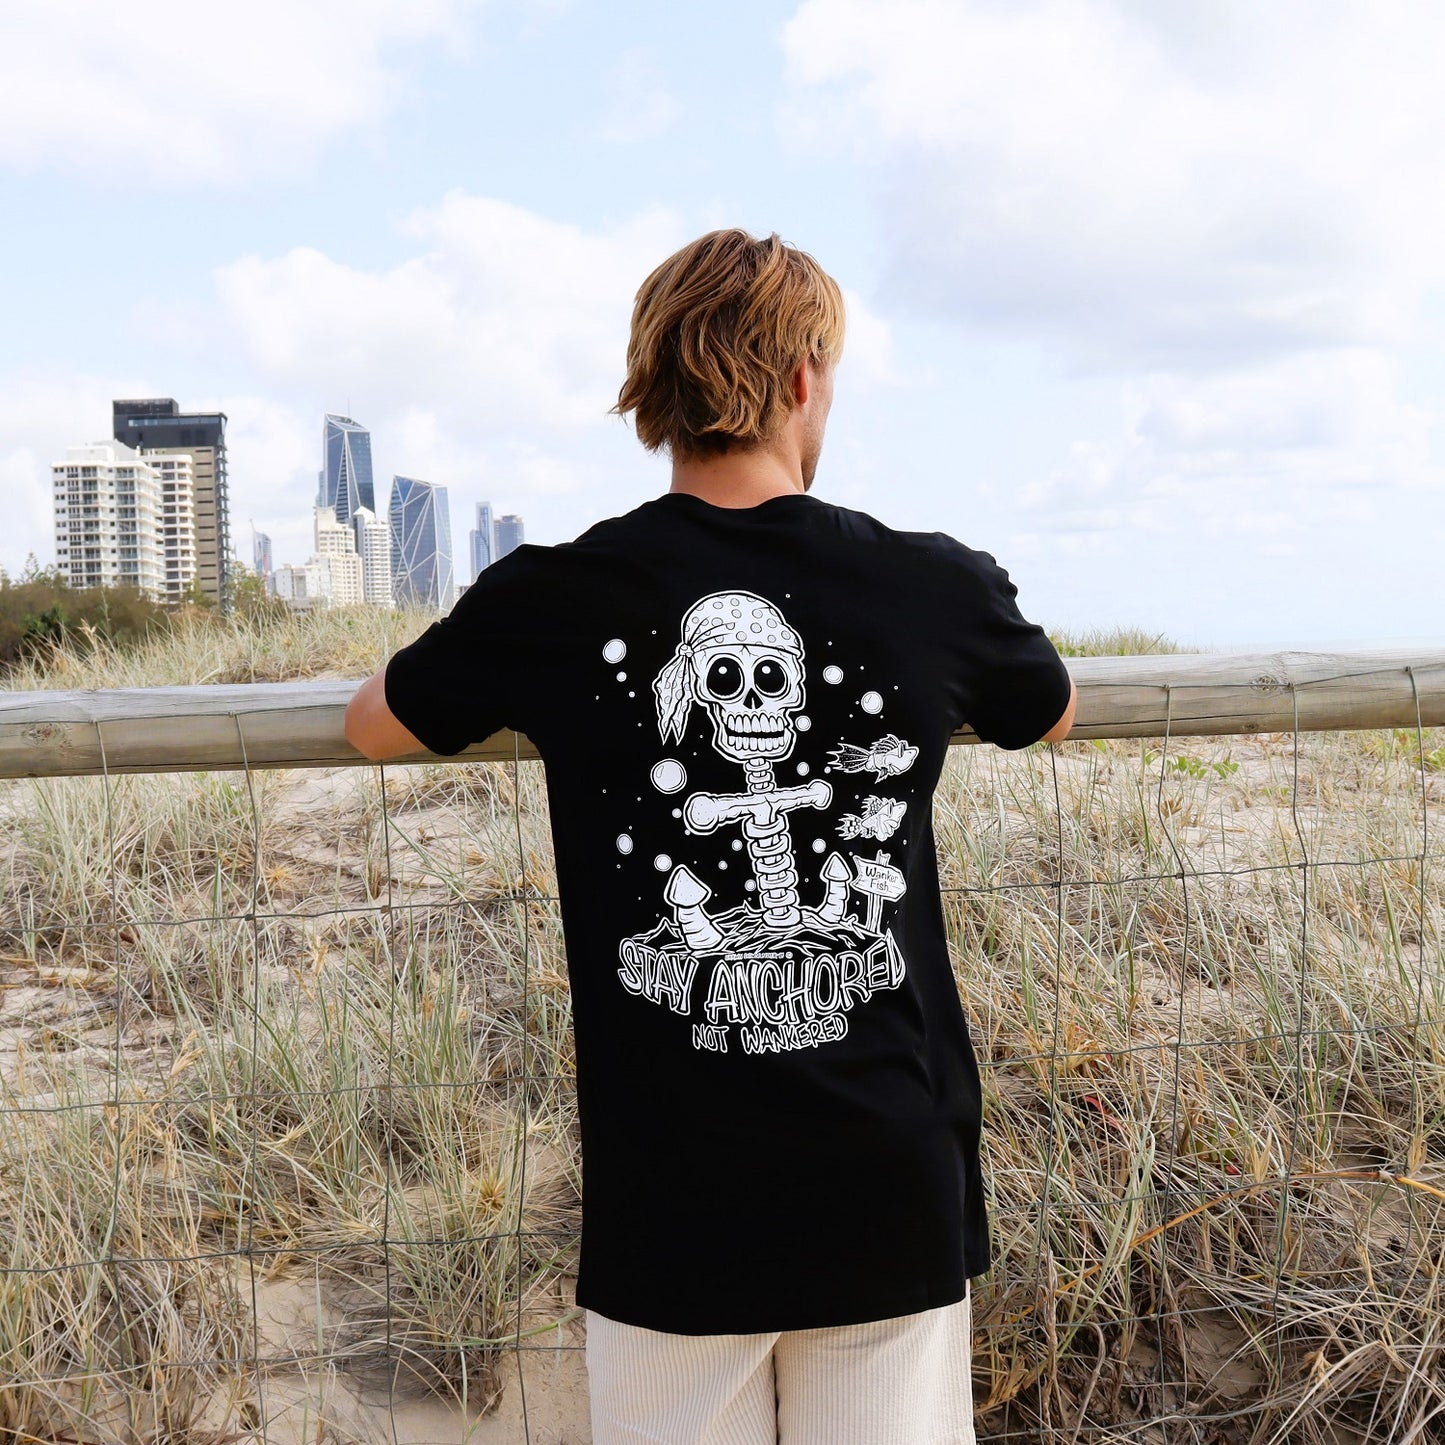 Stay Anchored T-Shirt